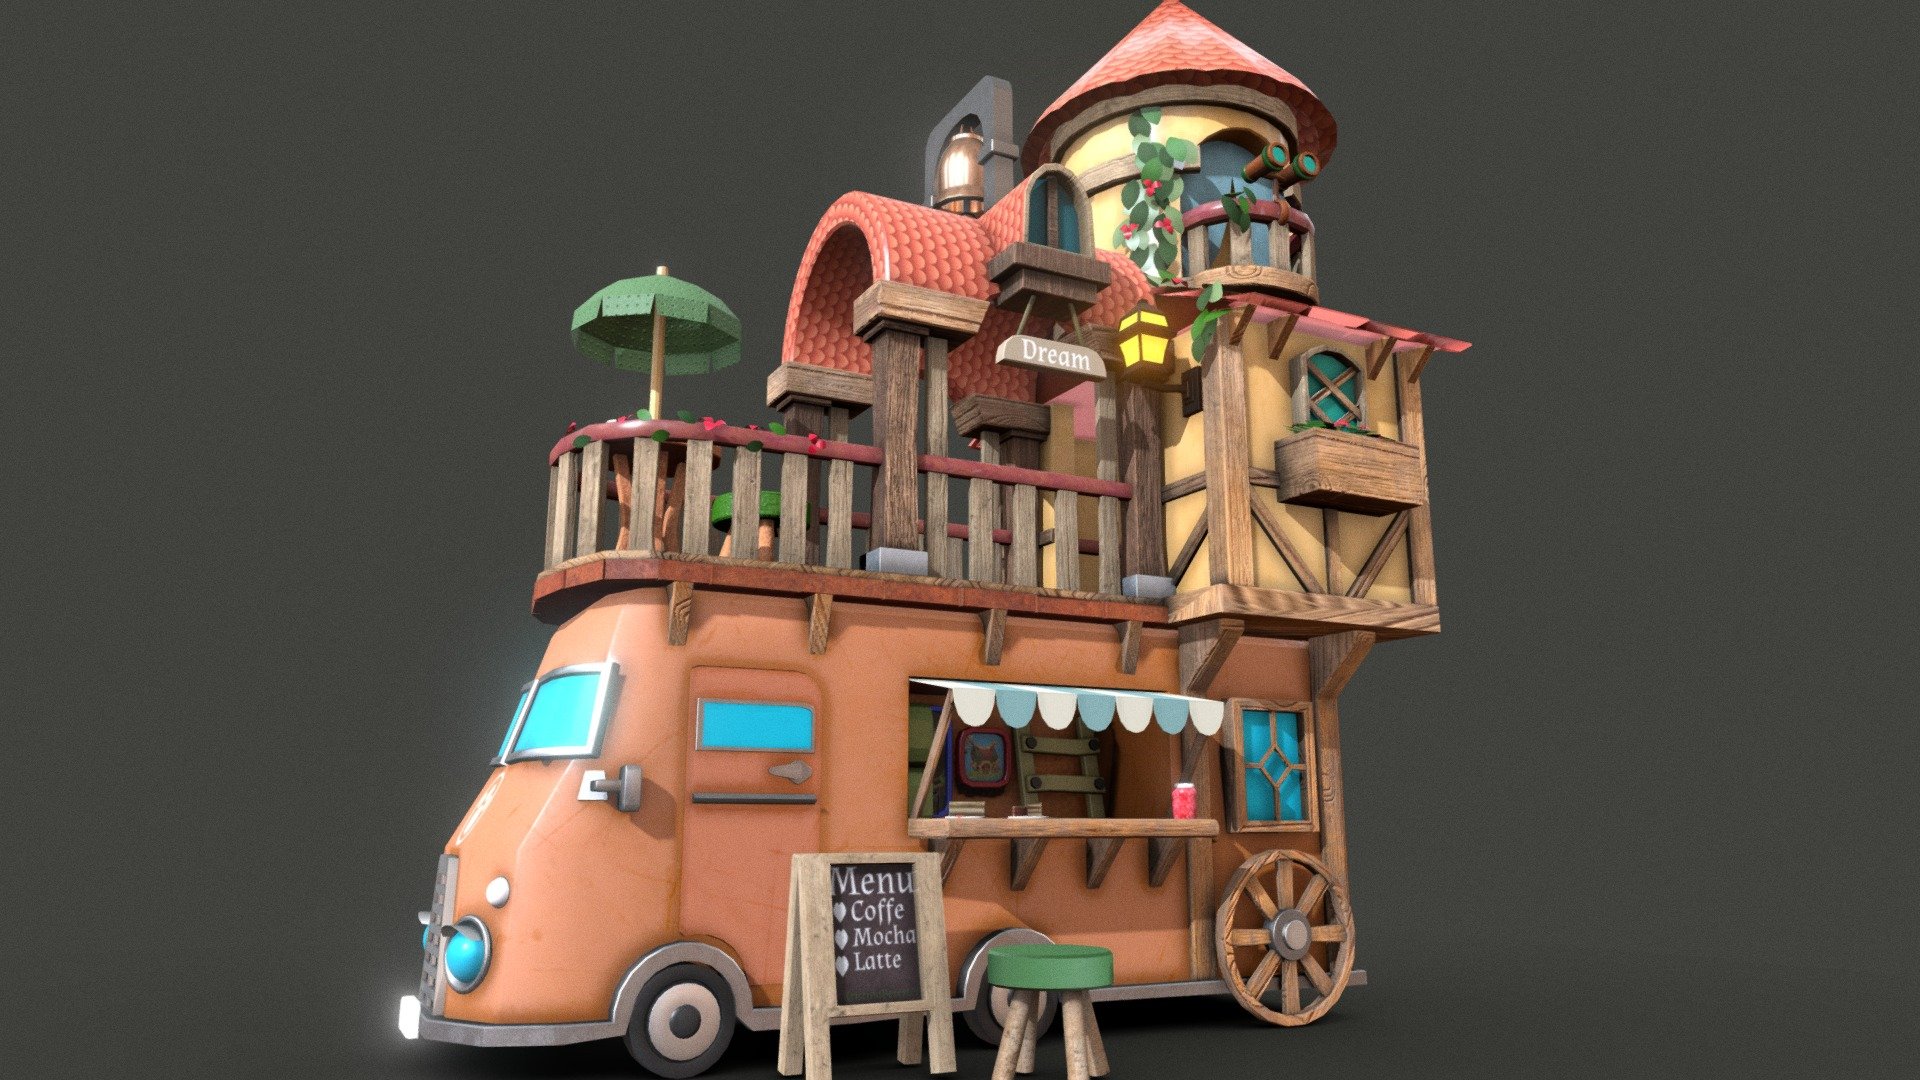 cafe on wheels  model using Blender and substance painter :) 
If you download, please like It’s not difficult for you, but it’s nice for me :) - cafe on wheels - 3D model by KristinaBeresten (@KrisBer) 3d model